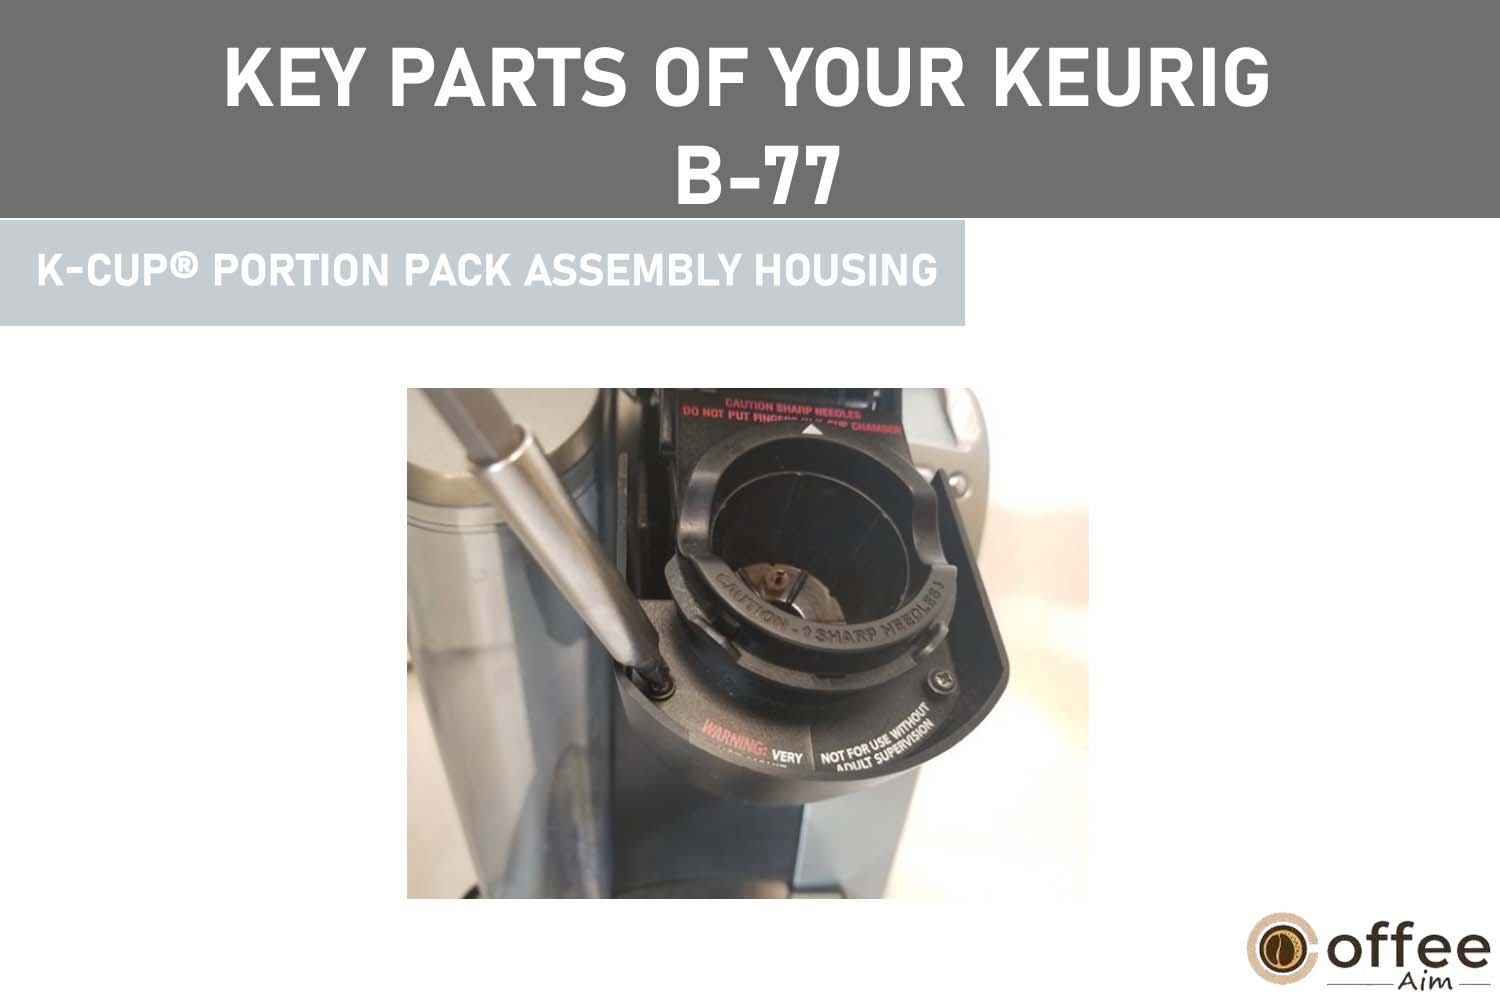 The K-Cup portion pack assembly in the Keurig B-77 holds the K-Cup portion pack holder securely at the bottom of the brewing chamber. It guides hot water from the reservoir through the K-Cup, brewing coffee into your mug.